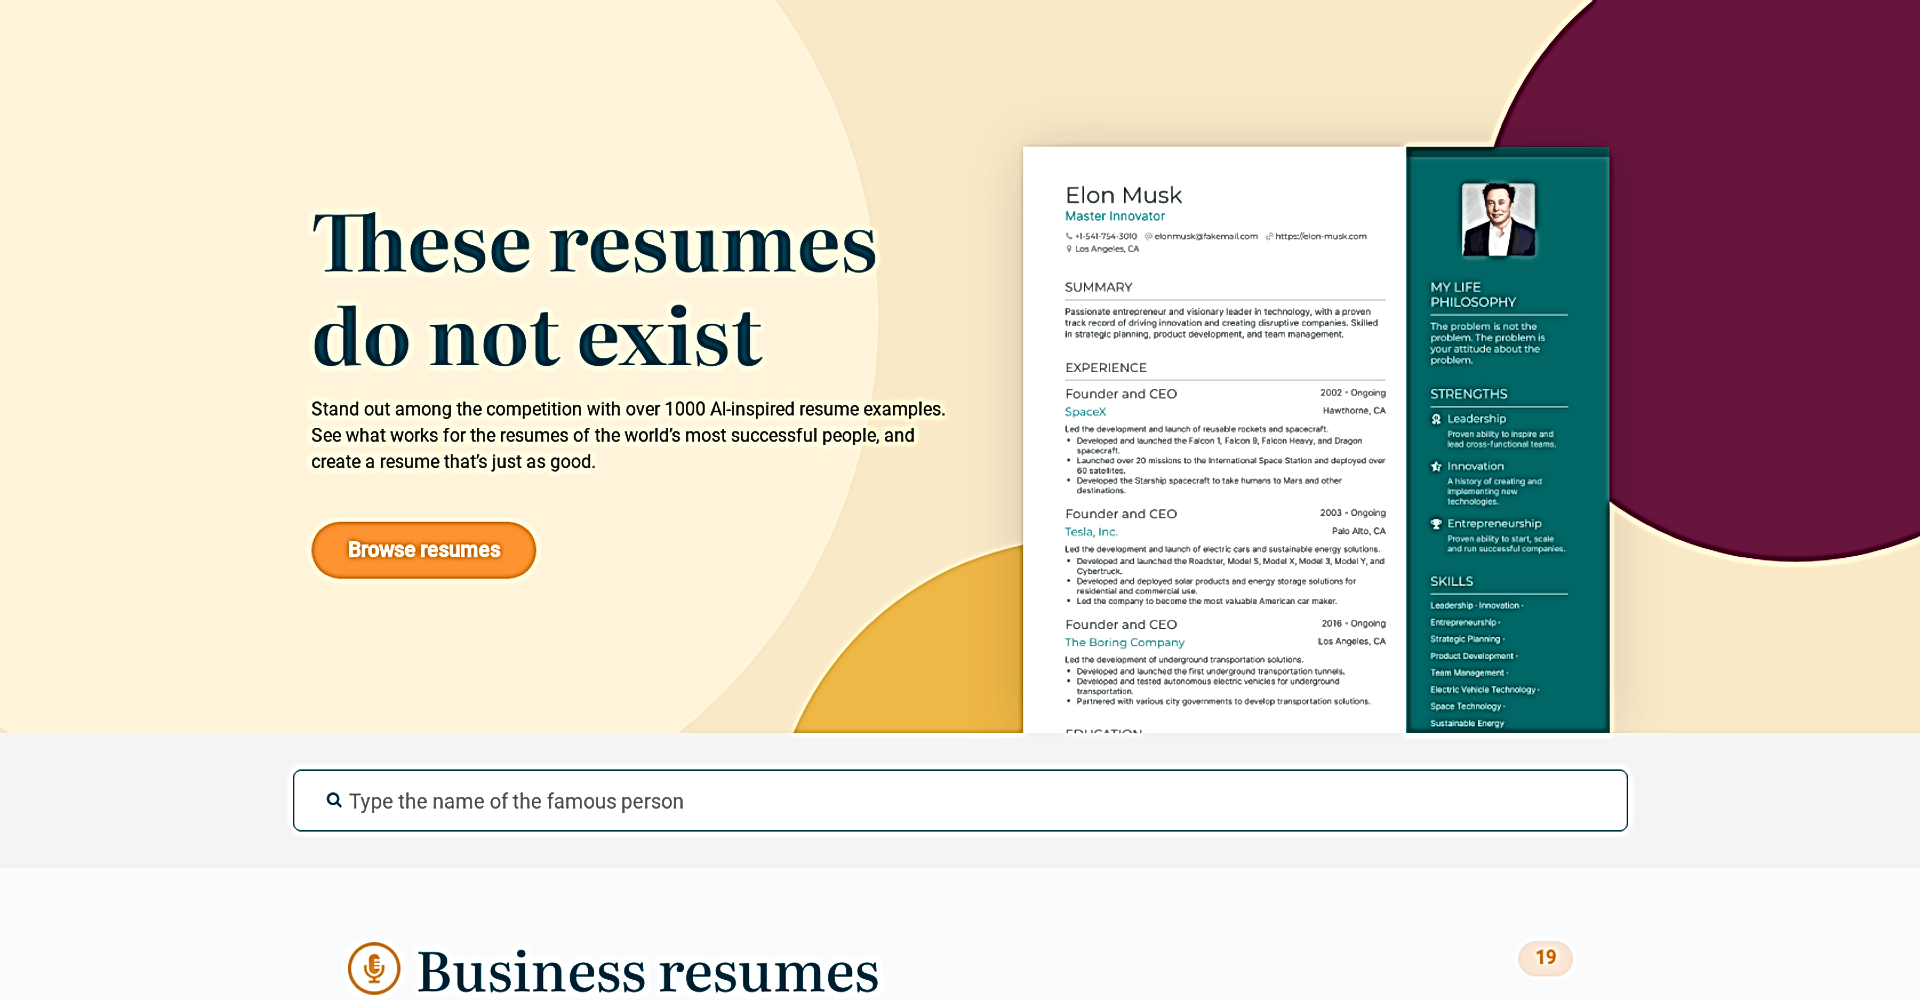 This Resume Does Not Exist featured